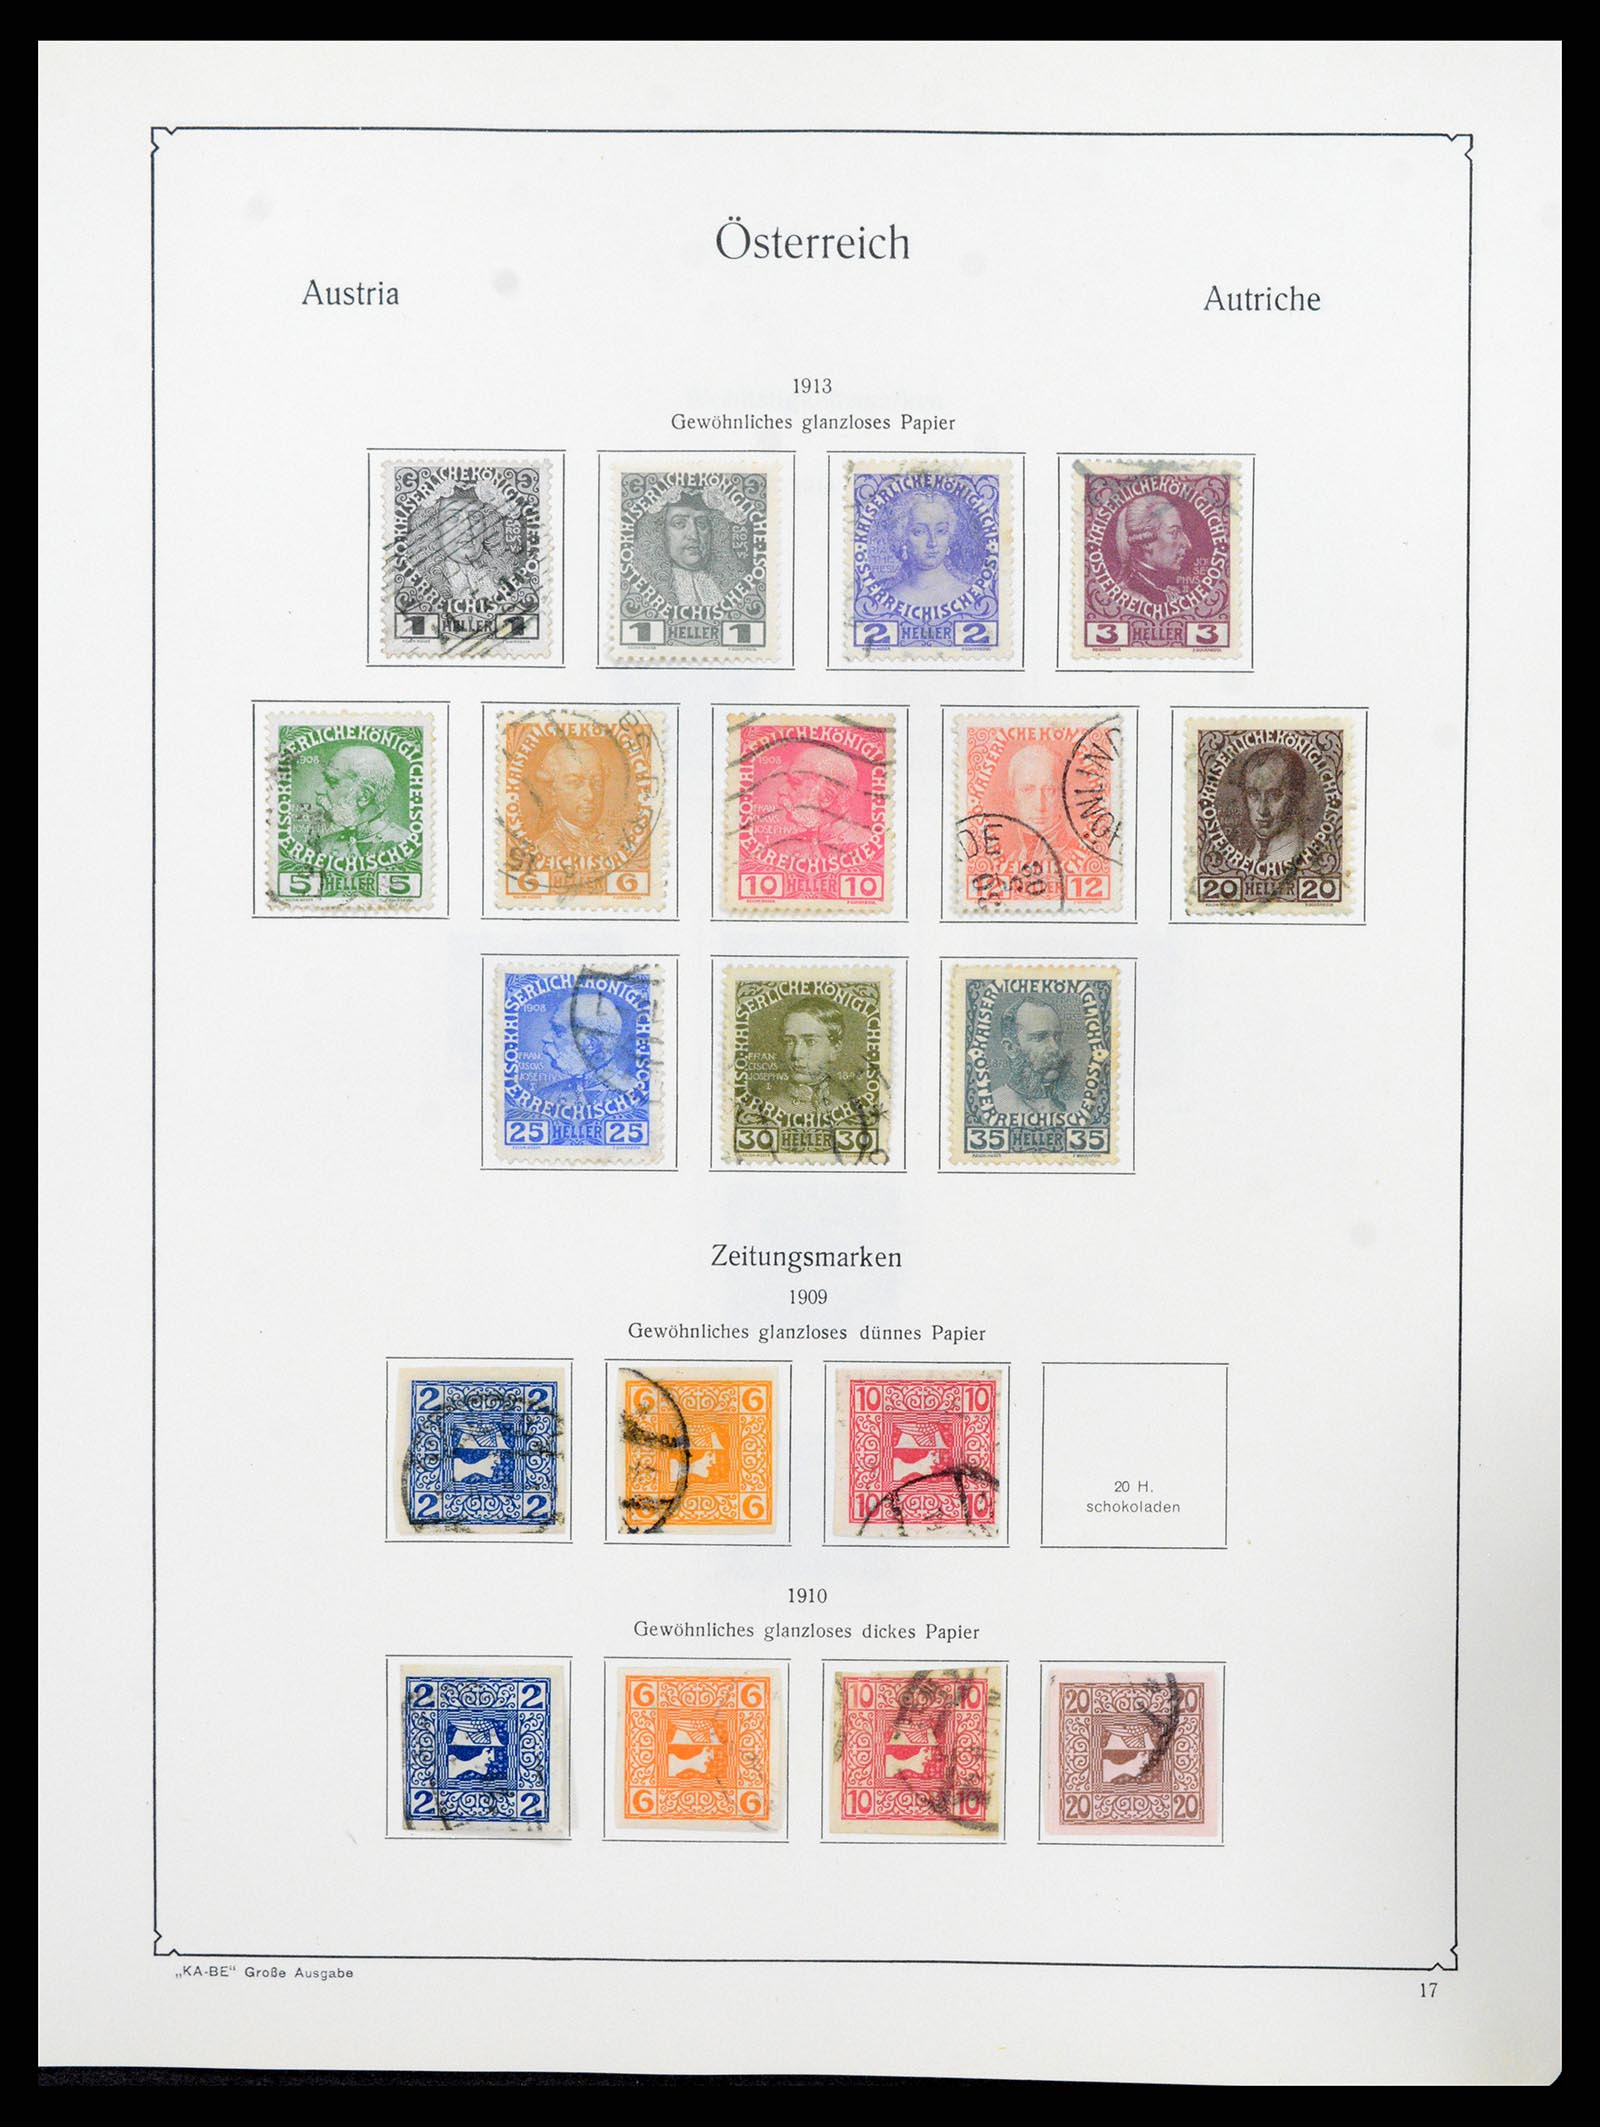 37960 022 - Stamp collection 37960 Austria and territories 1850-1984.